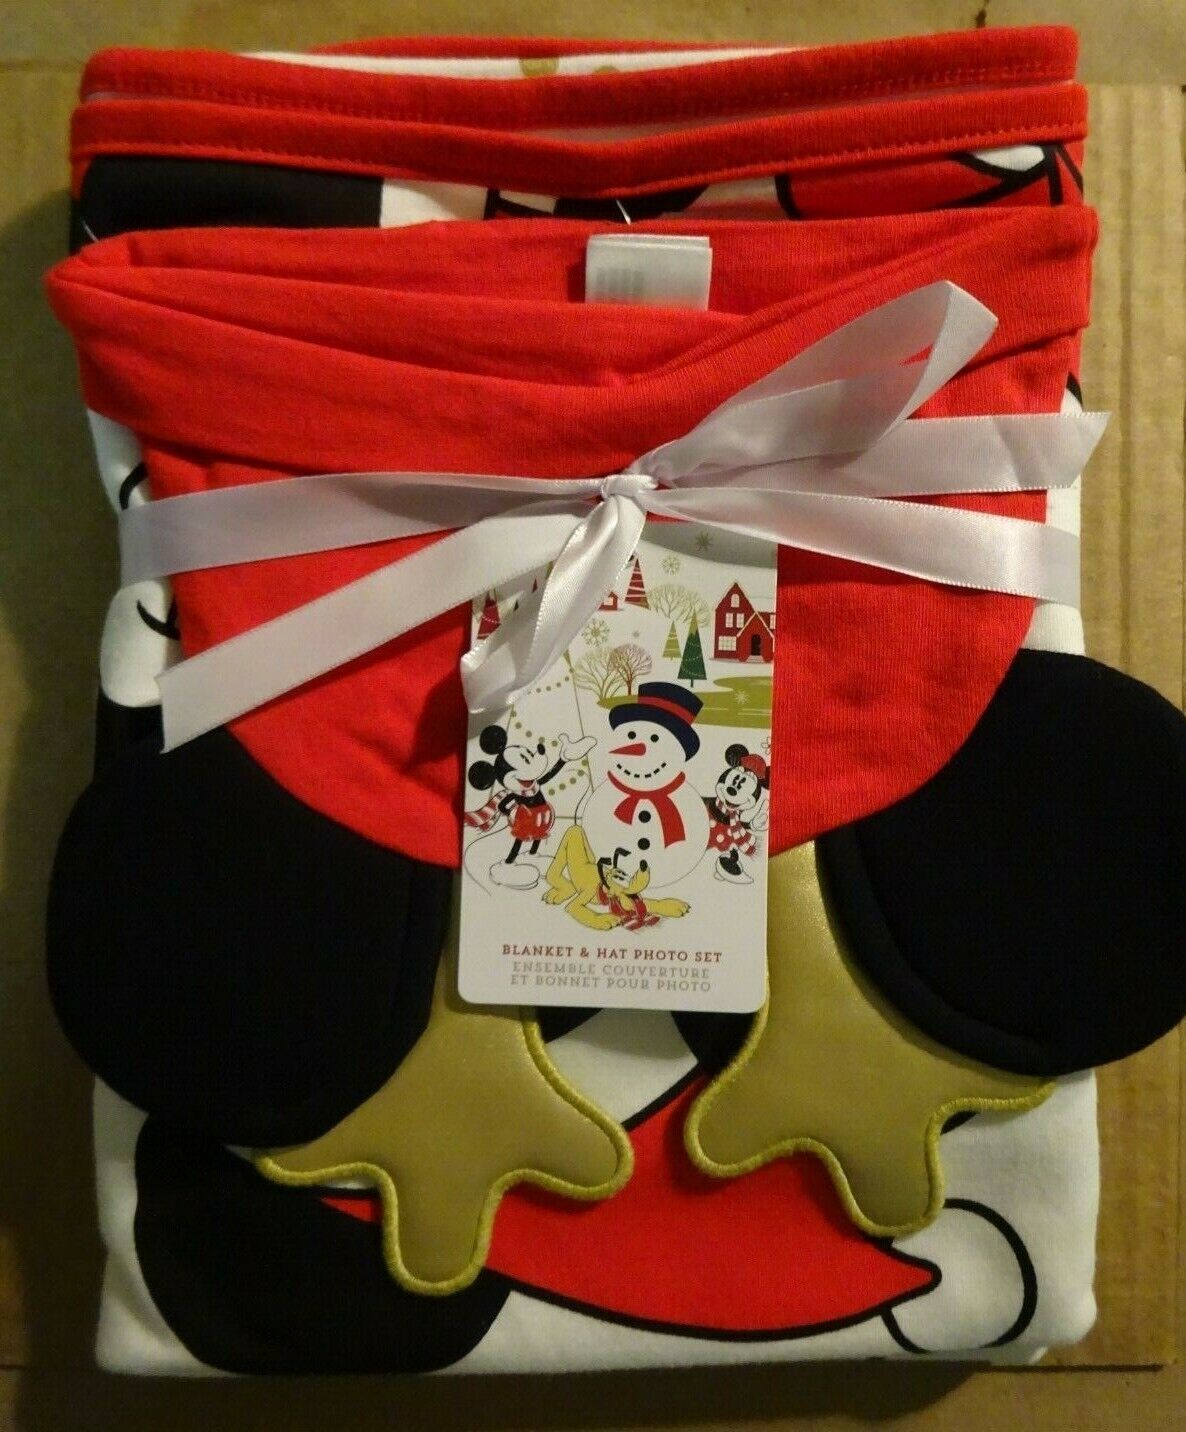 Disney Store Baby First Christmas Blanket and Hat Photo Poster painting Set Brand New MSRP $35